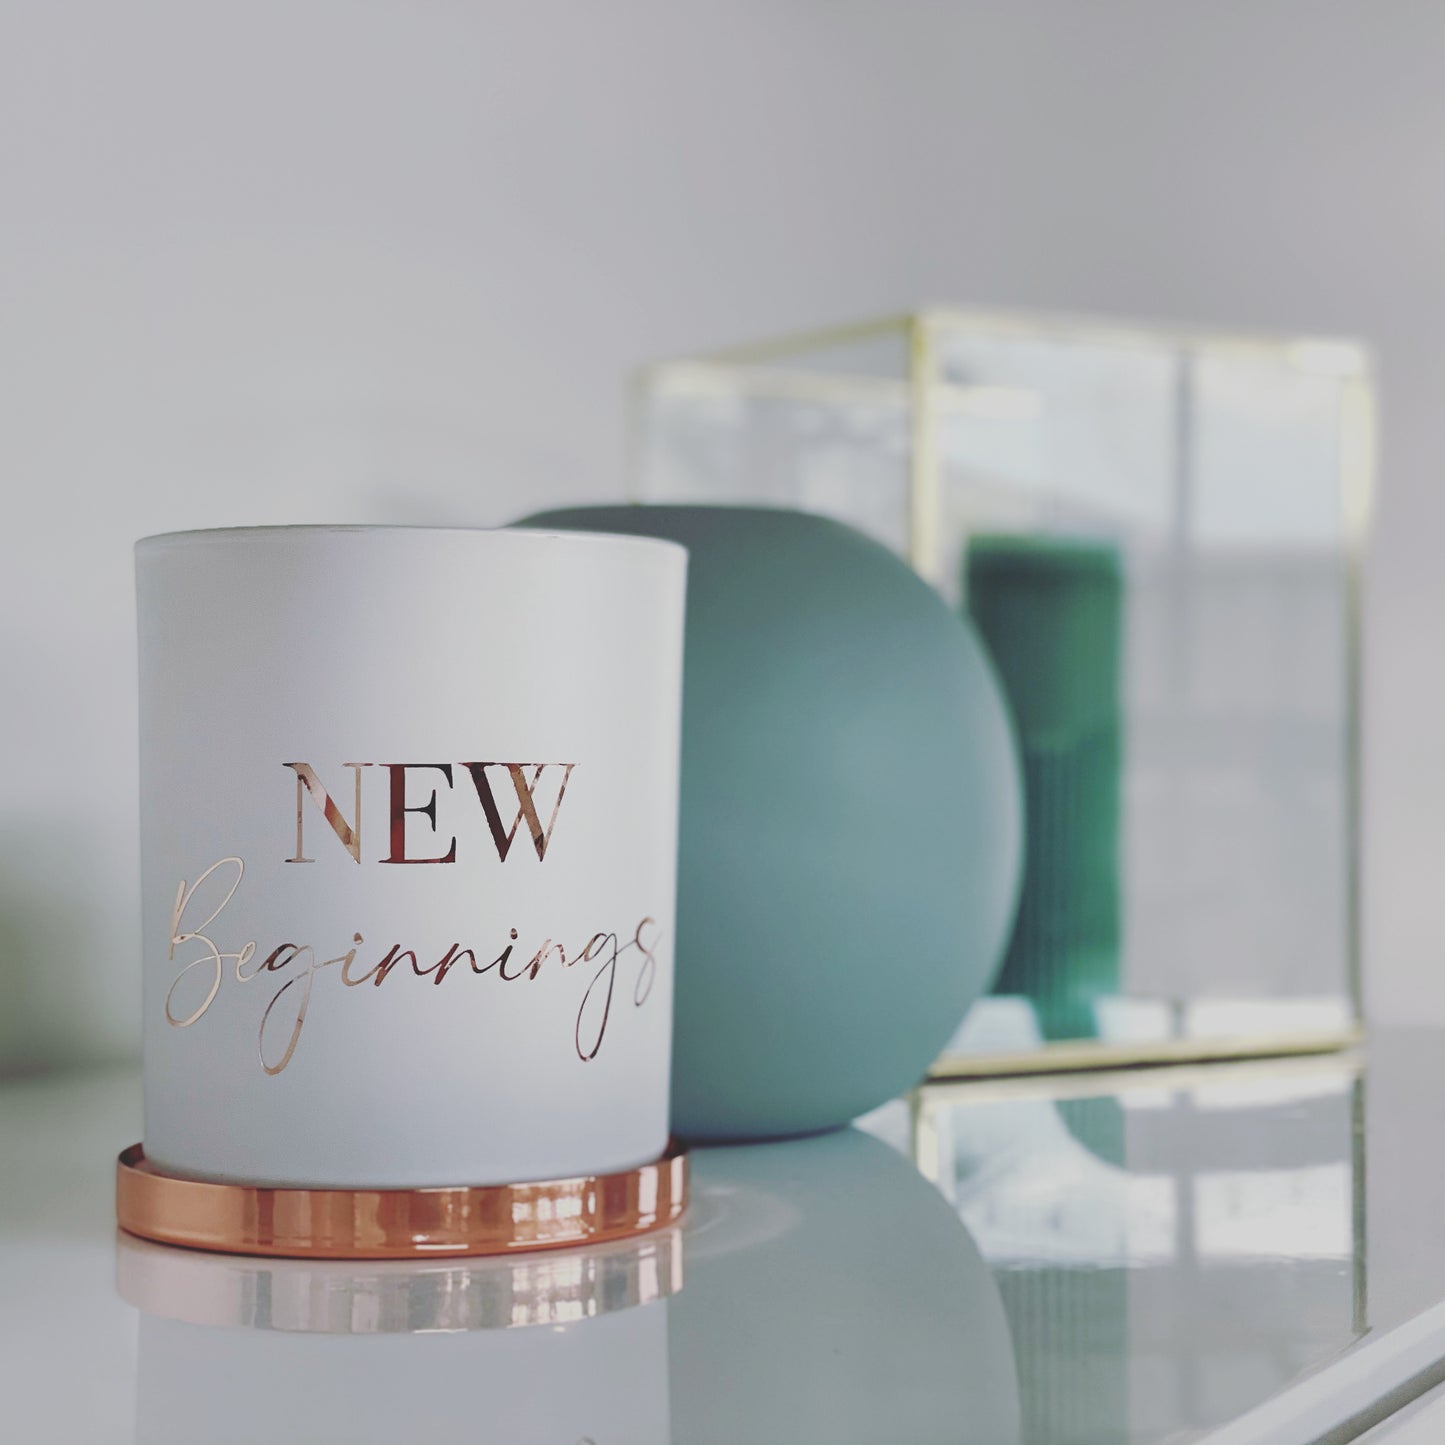 Matt White & Rose Gold Electroplated Candle